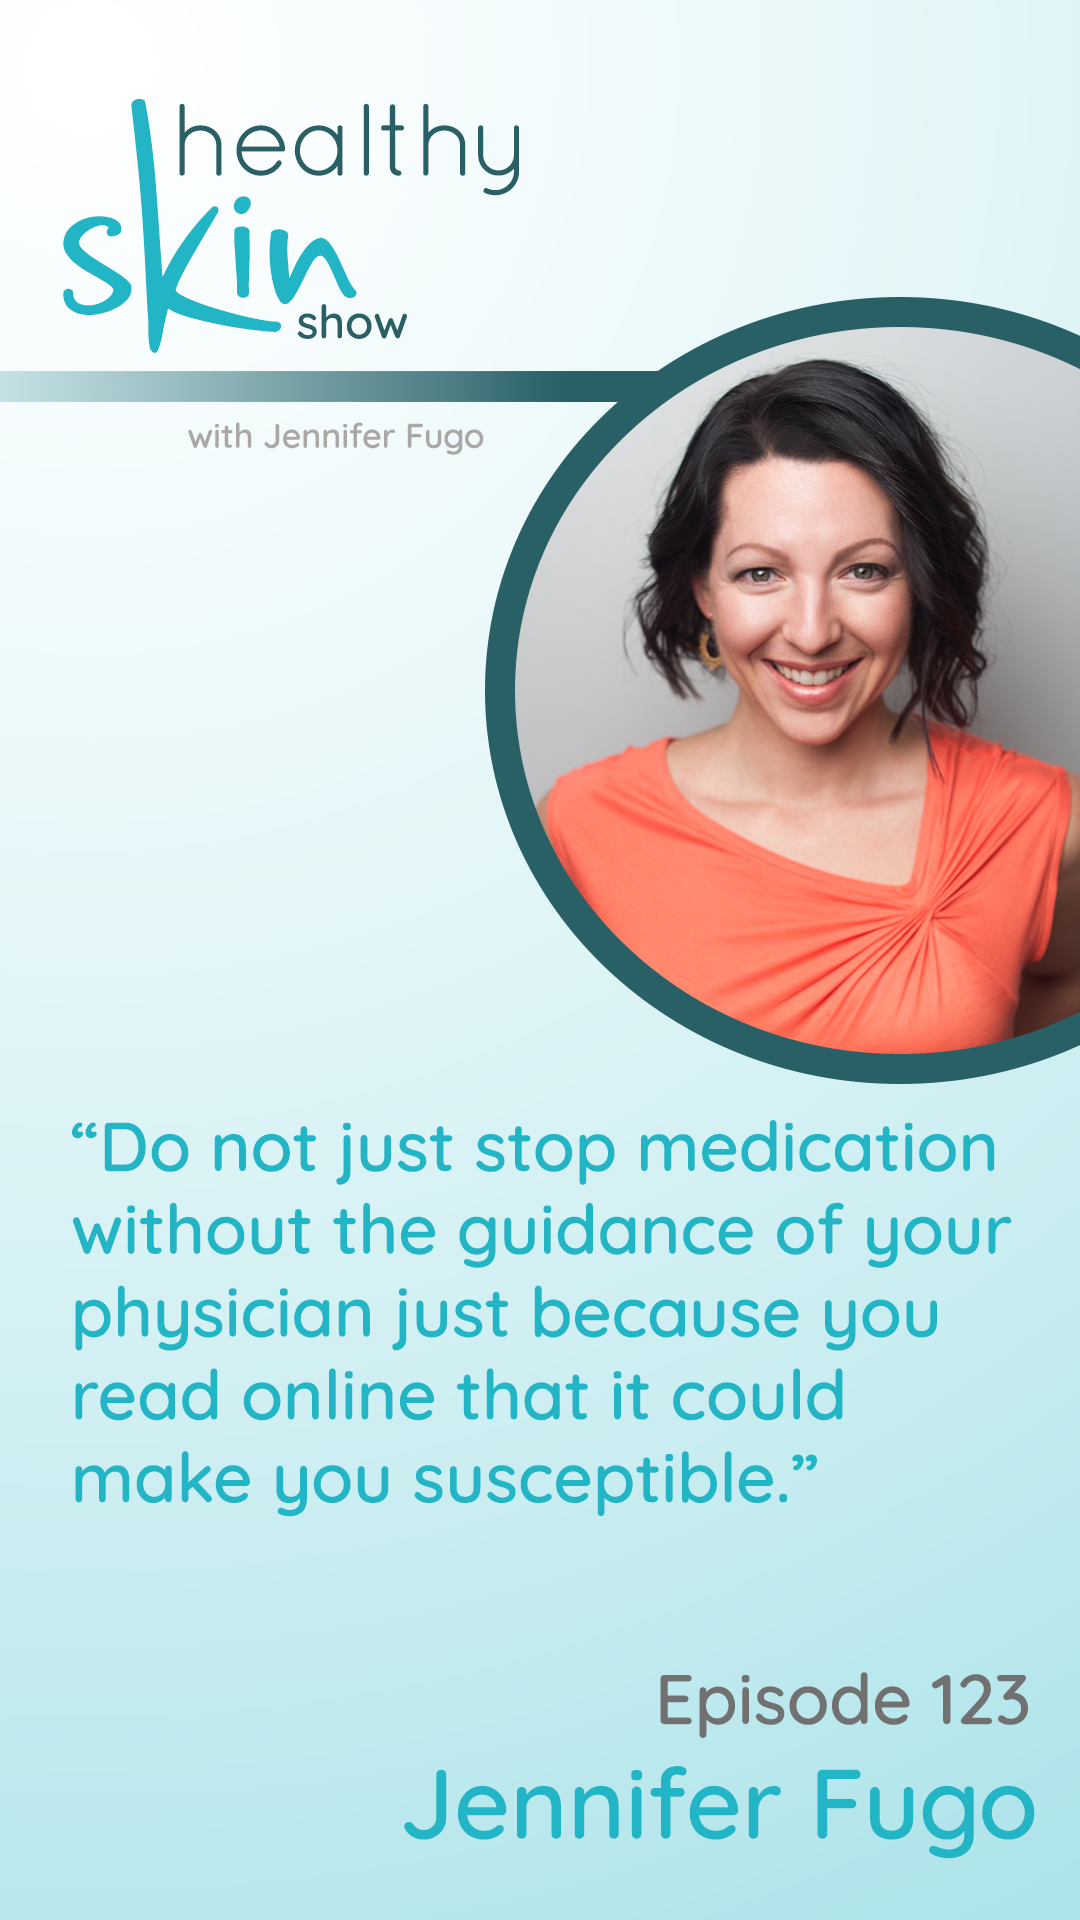 Do not just stop medication without the guidance of your physician just because you read online that it could make you susceptible.